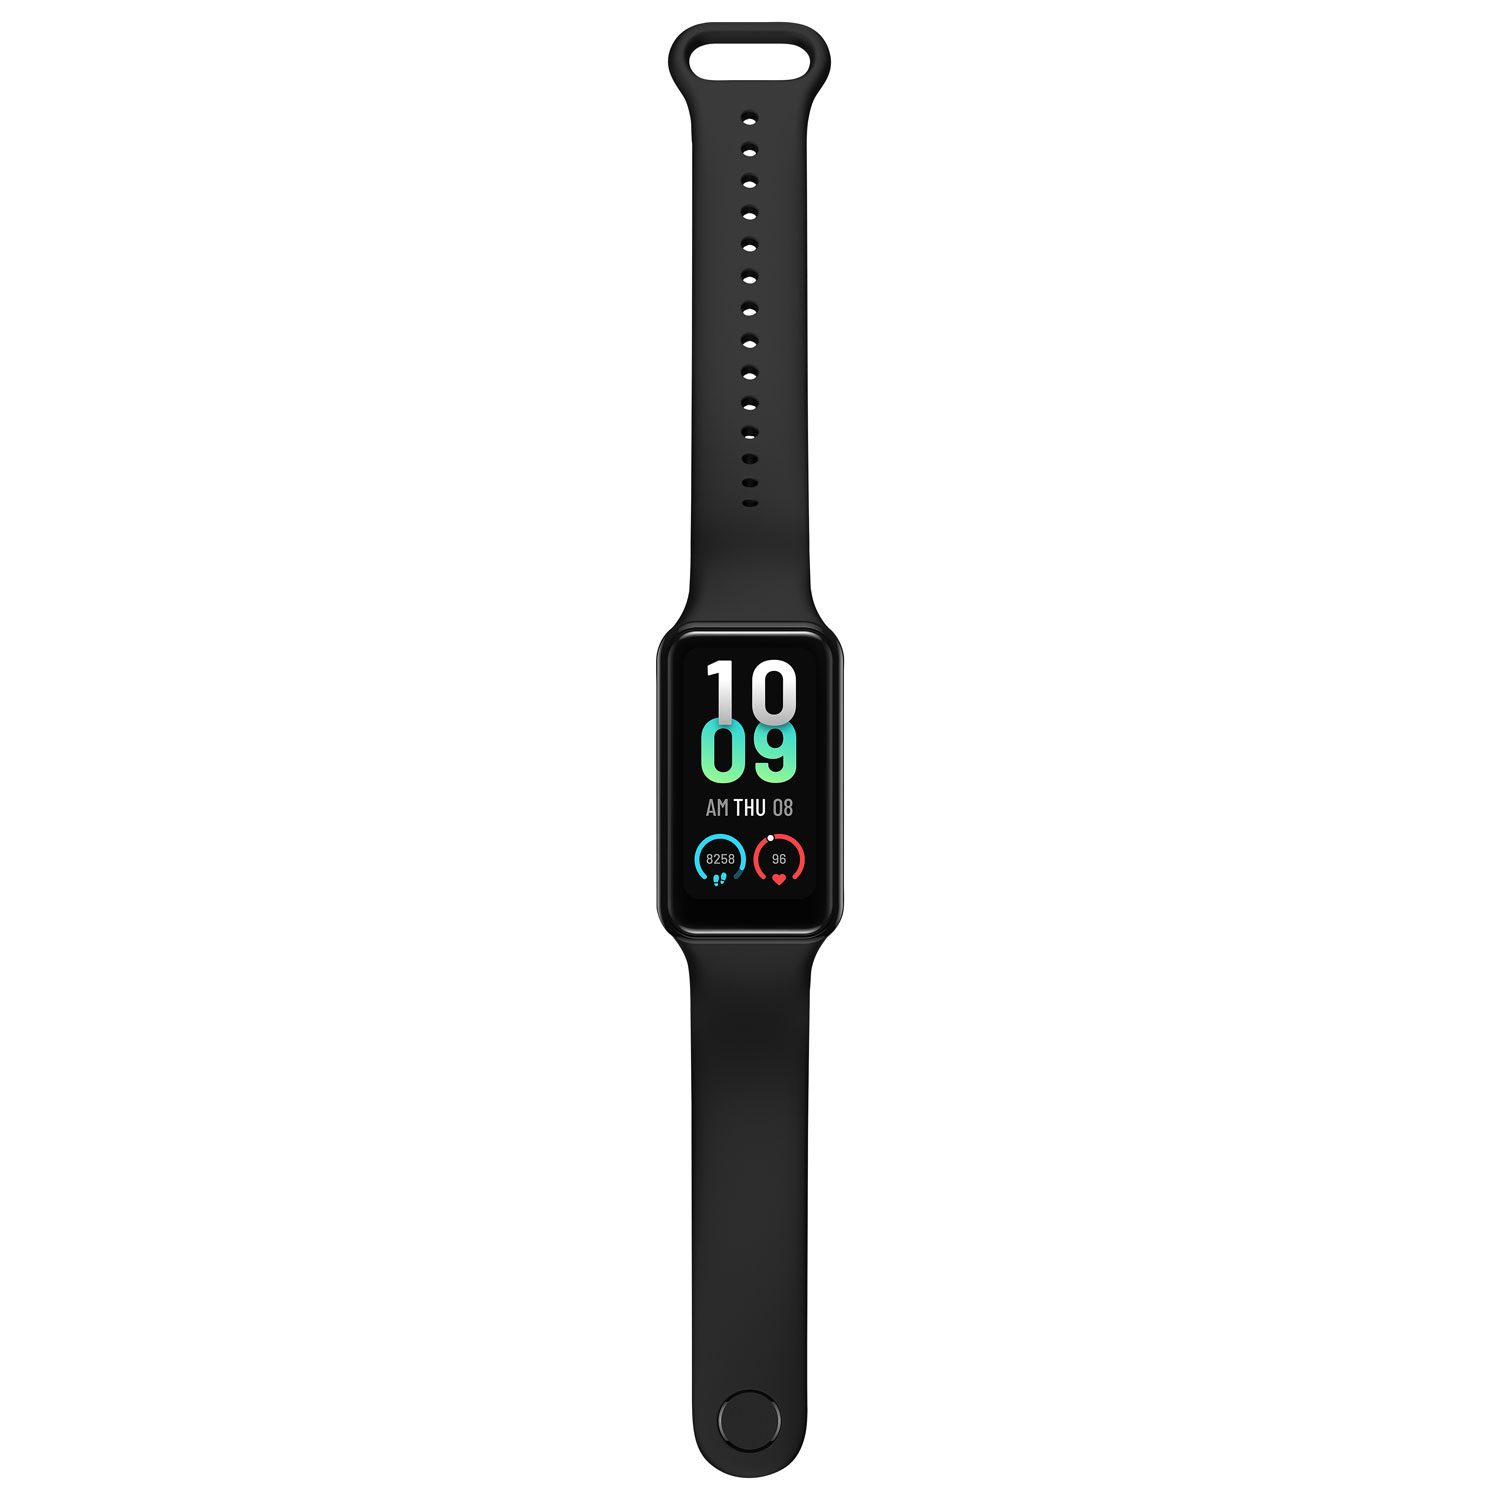 Amazfit Band 7 fitness tracker leaks online; expected to cost around $50 -  Gizmochina